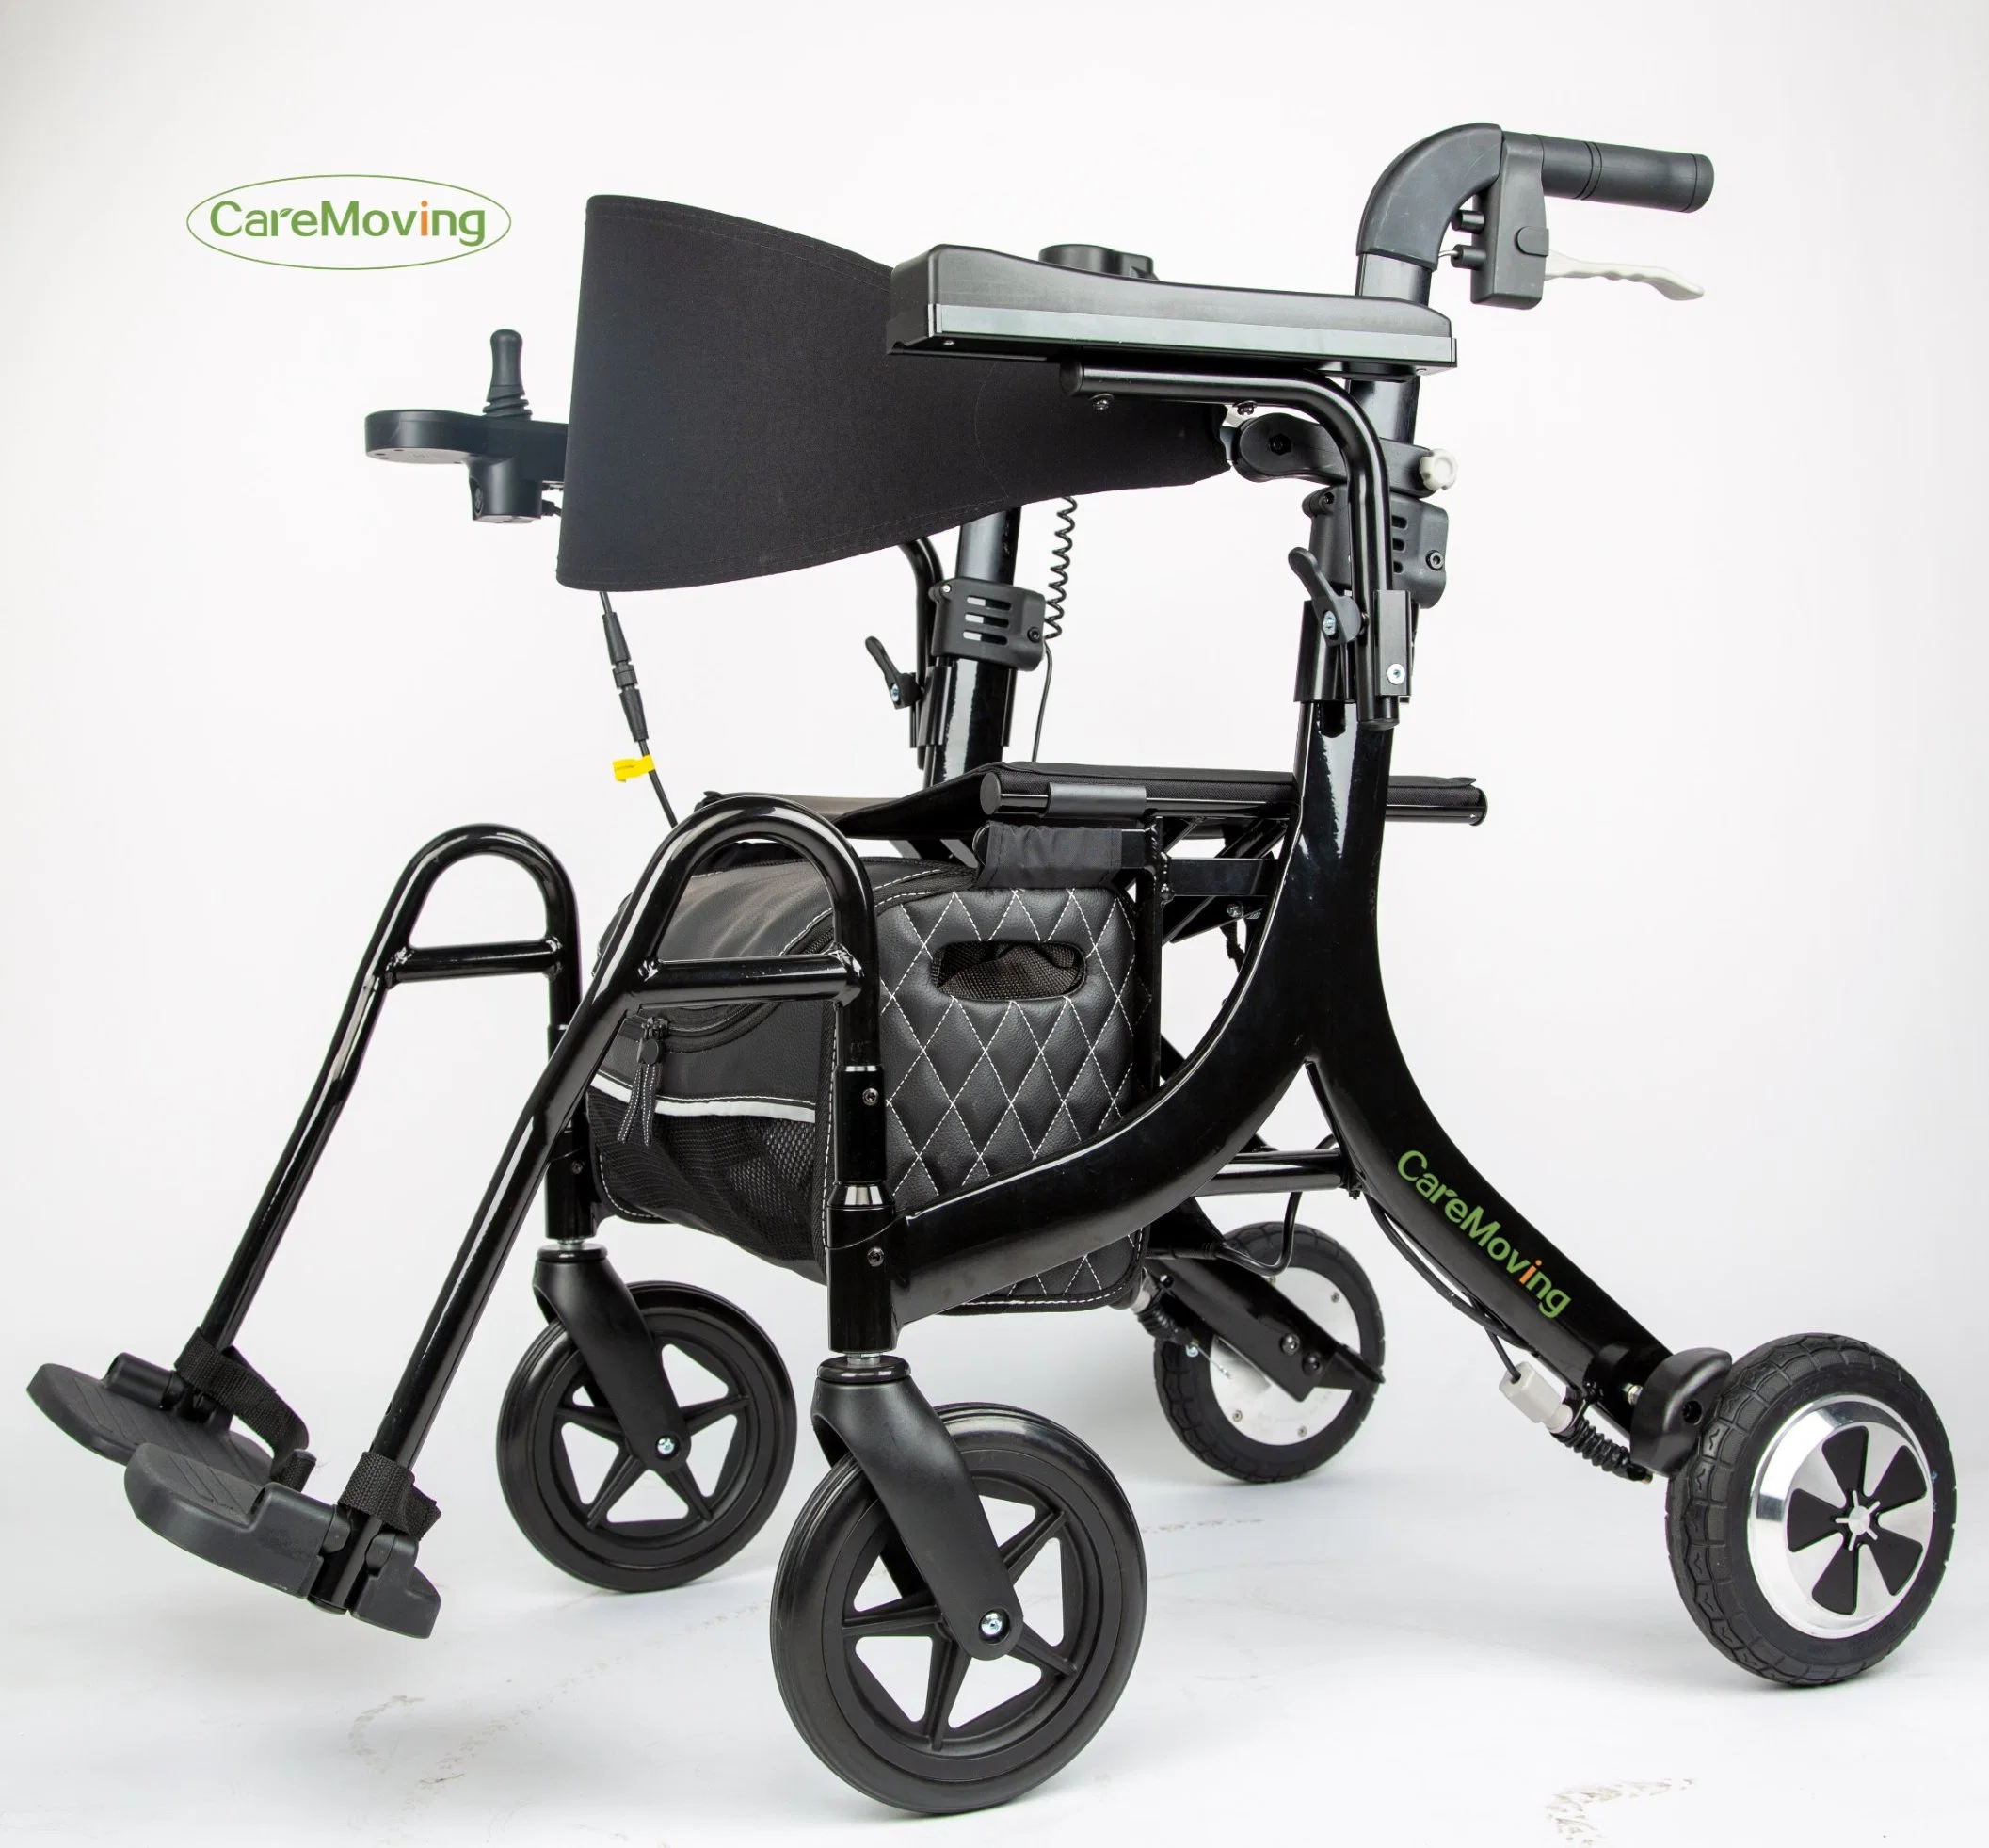 Easy Portable Fold 4 Wheel Rolling Motorized Upright Walkers for Seniors with Seat and Armrest